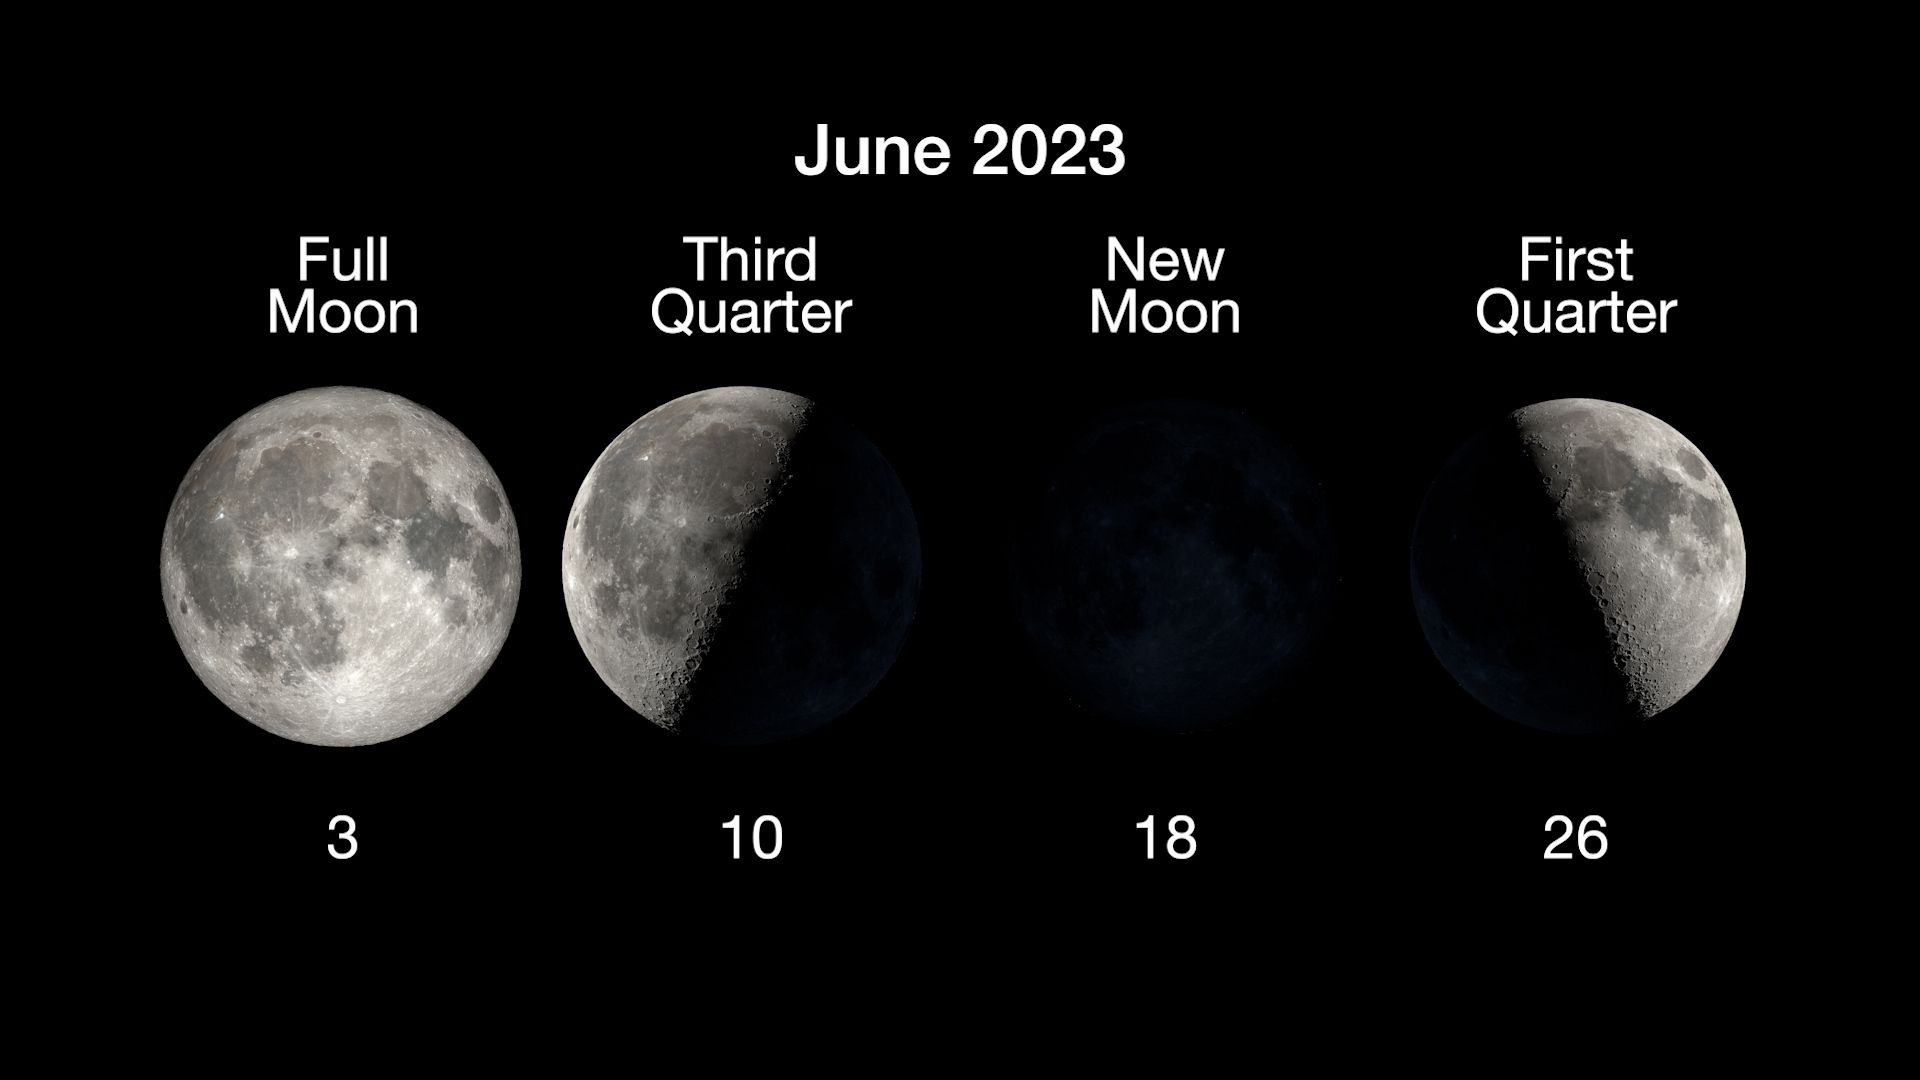 The four main phases of the Moon are illustrated in a horizontal row,  with the full moon on June 3, third quarter on June 10, new moon on June 18, and first quarter on June 26.  